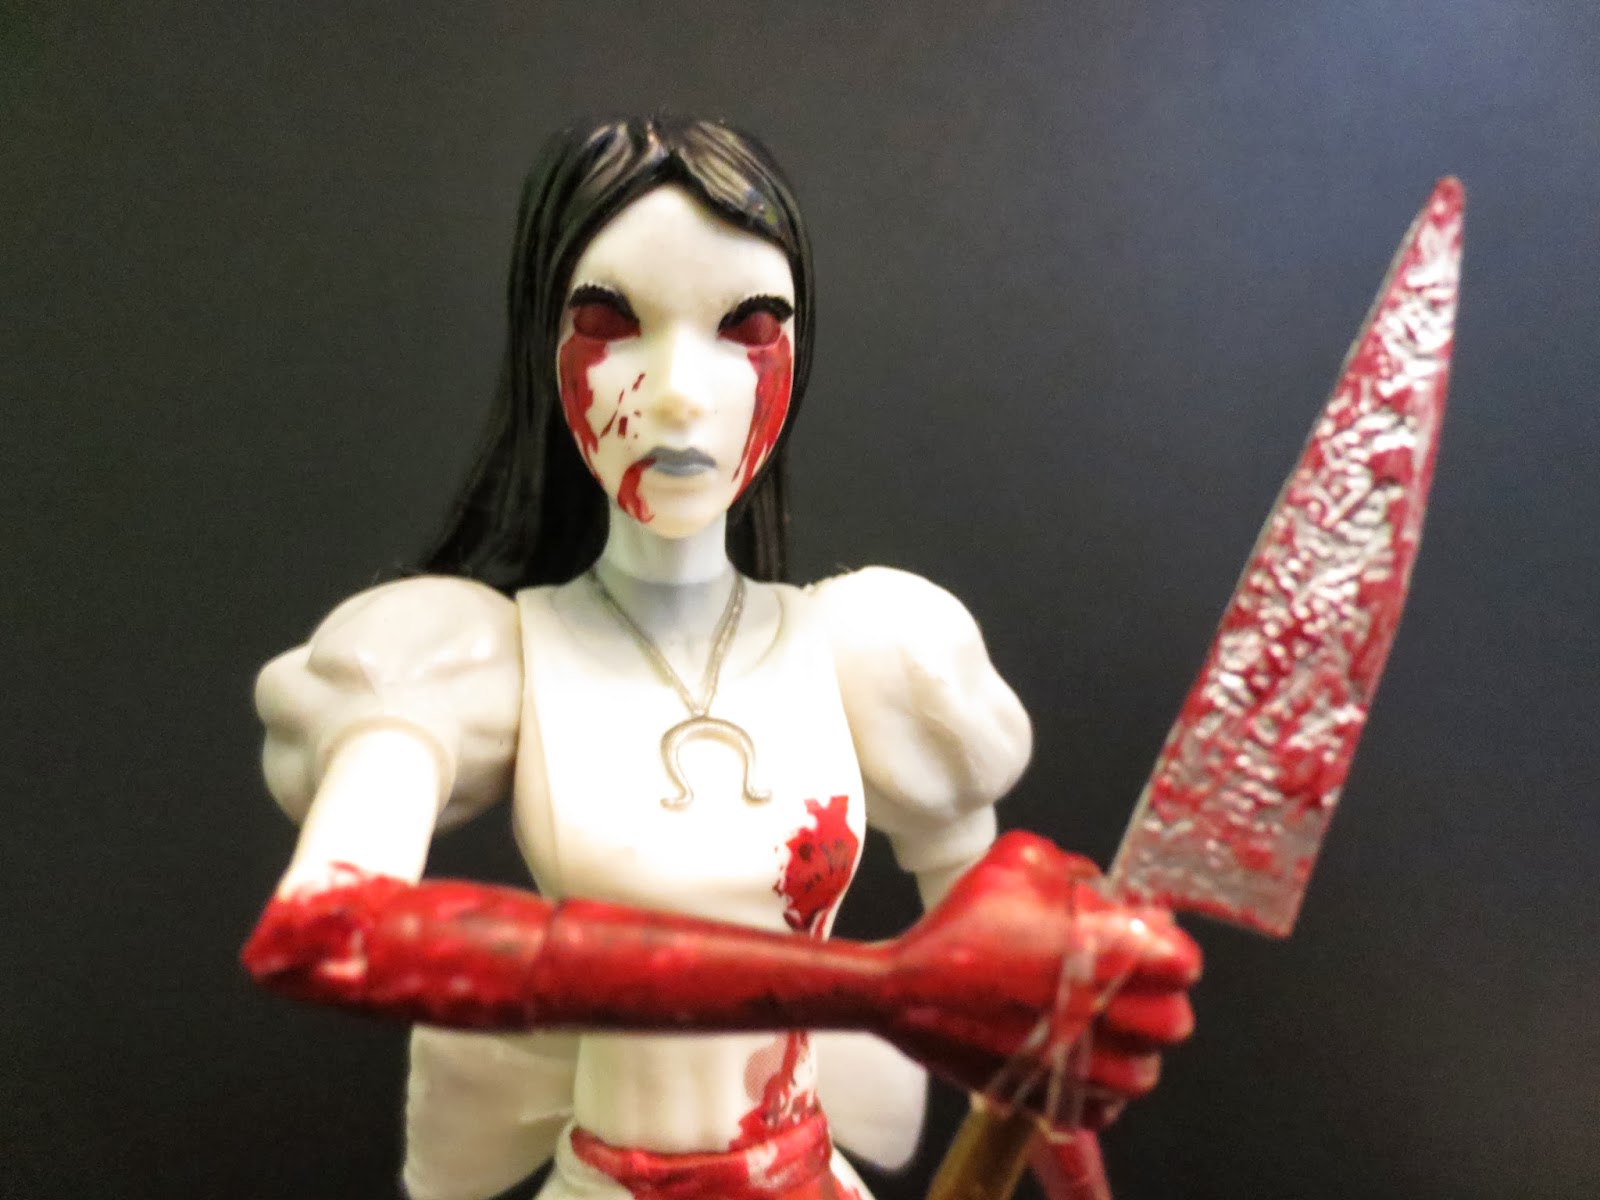 Alice Madness Returns: Dress and Weapons (Part – I)